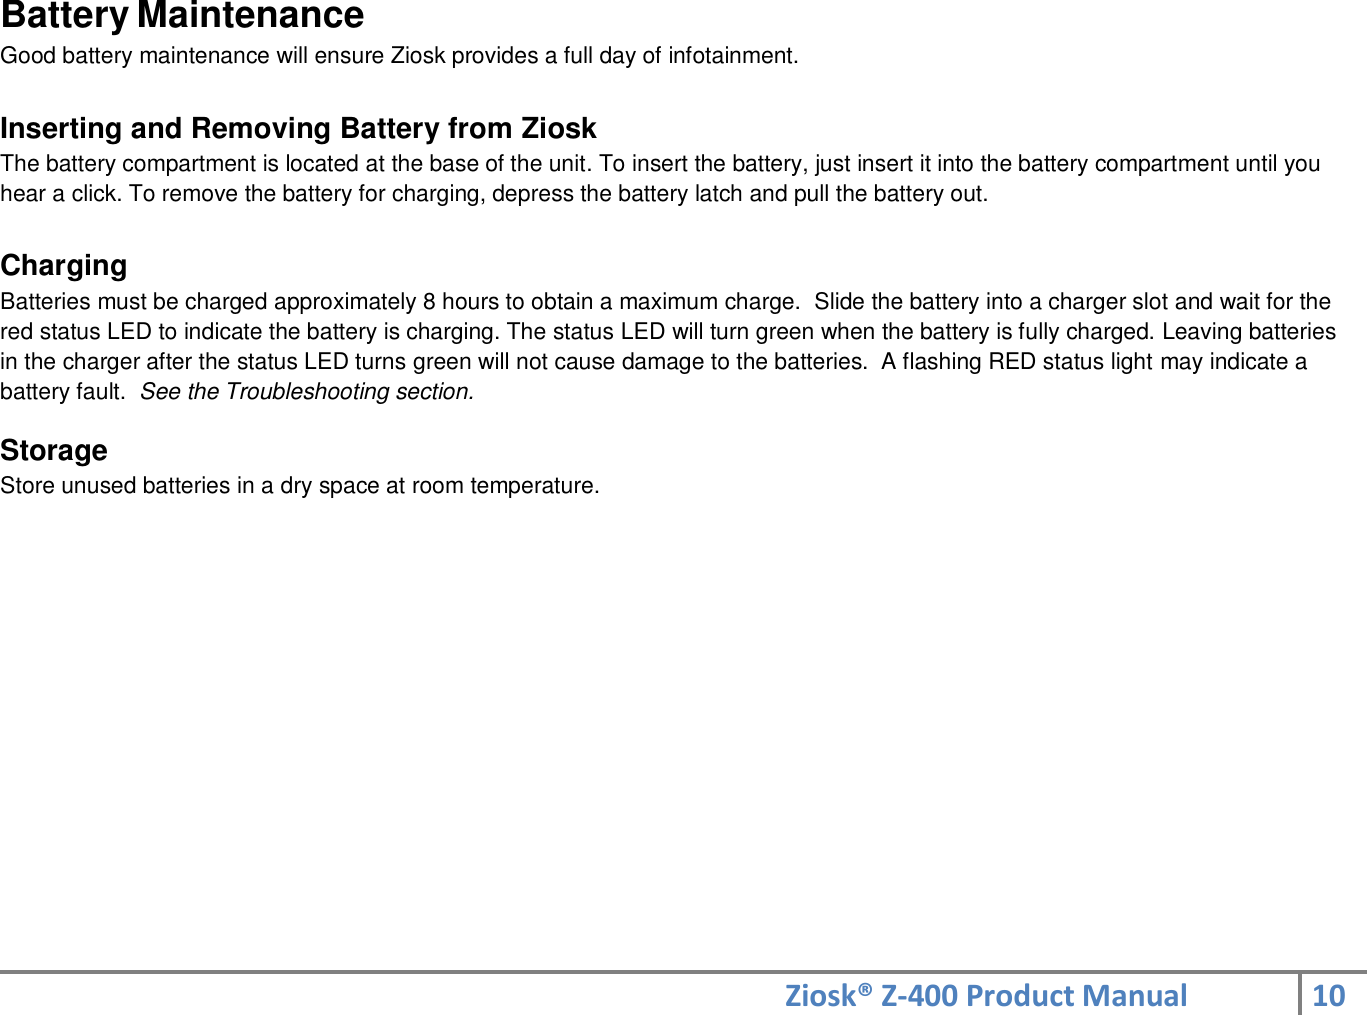 Ziosk® Z-400 Product Manual 10  Battery Maintenance Good battery maintenance will ensure Ziosk provides a full day of infotainment.  Inserting and Removing Battery from Ziosk The battery compartment is located at the base of the unit. To insert the battery, just insert it into the battery compartment until you hear a click. To remove the battery for charging, depress the battery latch and pull the battery out.  Charging Batteries must be charged approximately 8 hours to obtain a maximum charge.  Slide the battery into a charger slot and wait for the red status LED to indicate the battery is charging. The status LED will turn green when the battery is fully charged. Leaving batteries in the charger after the status LED turns green will not cause damage to the batteries.  A flashing RED status light may indicate a battery fault.  See the Troubleshooting section.  Storage Store unused batteries in a dry space at room temperature.    